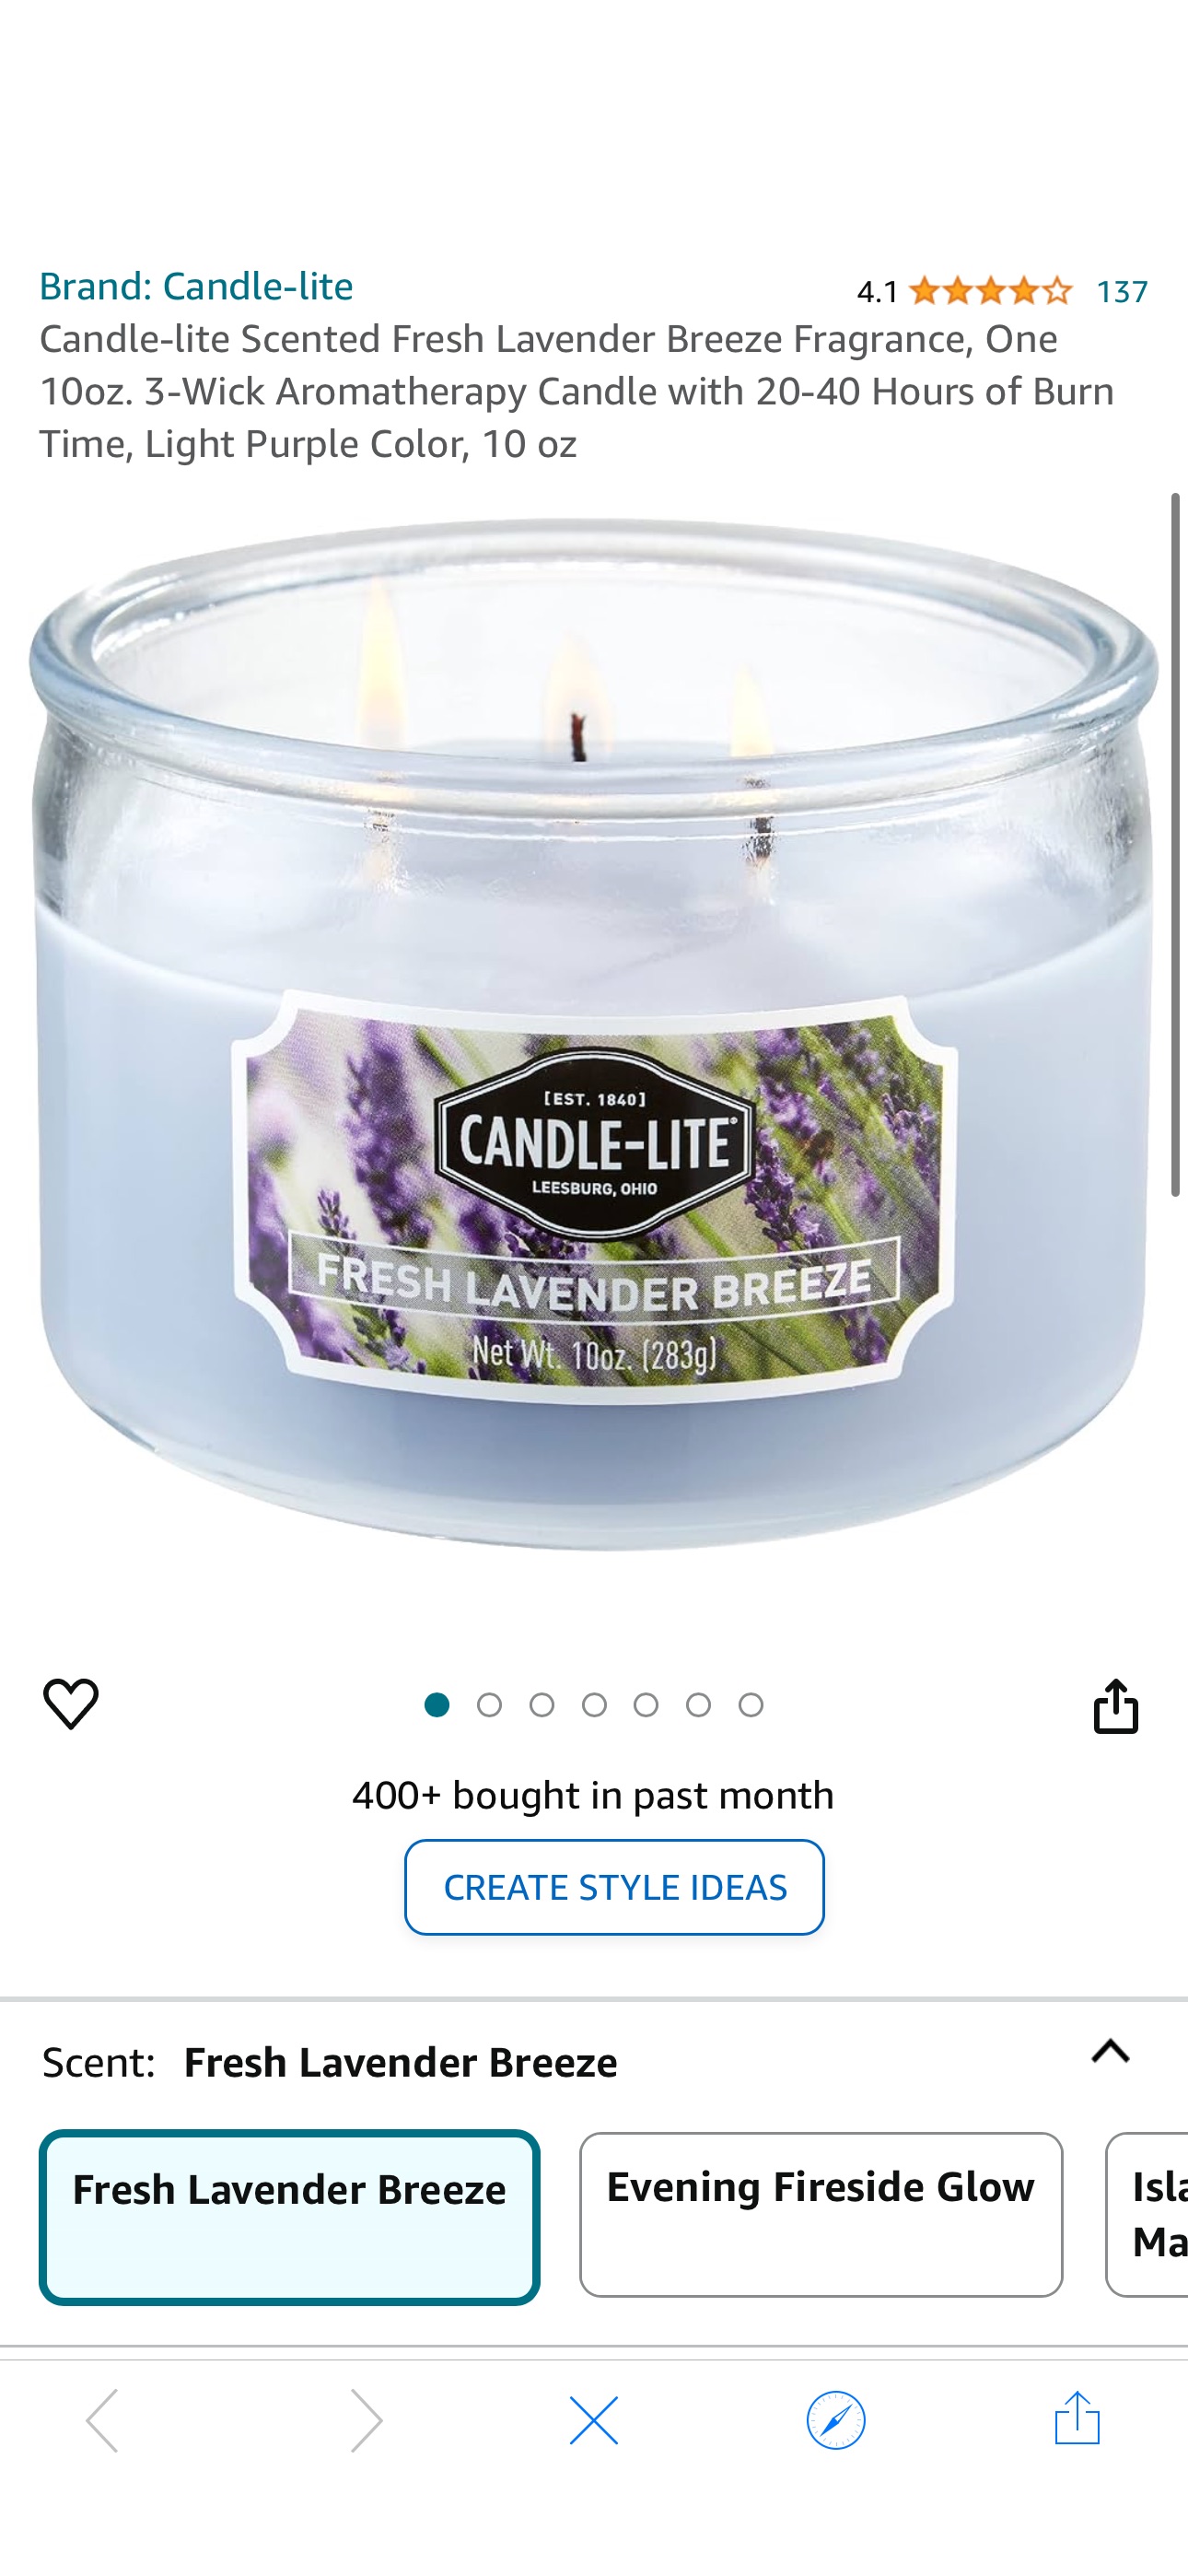 Amazon.com: Candle-lite Scented Fresh Lavender Breeze Fragrance, One 10oz. 3-Wick Aromatherapy Candle with 20-40 Hours of Burn Time, Light Purple Color, 10 oz : Home & Kitchen